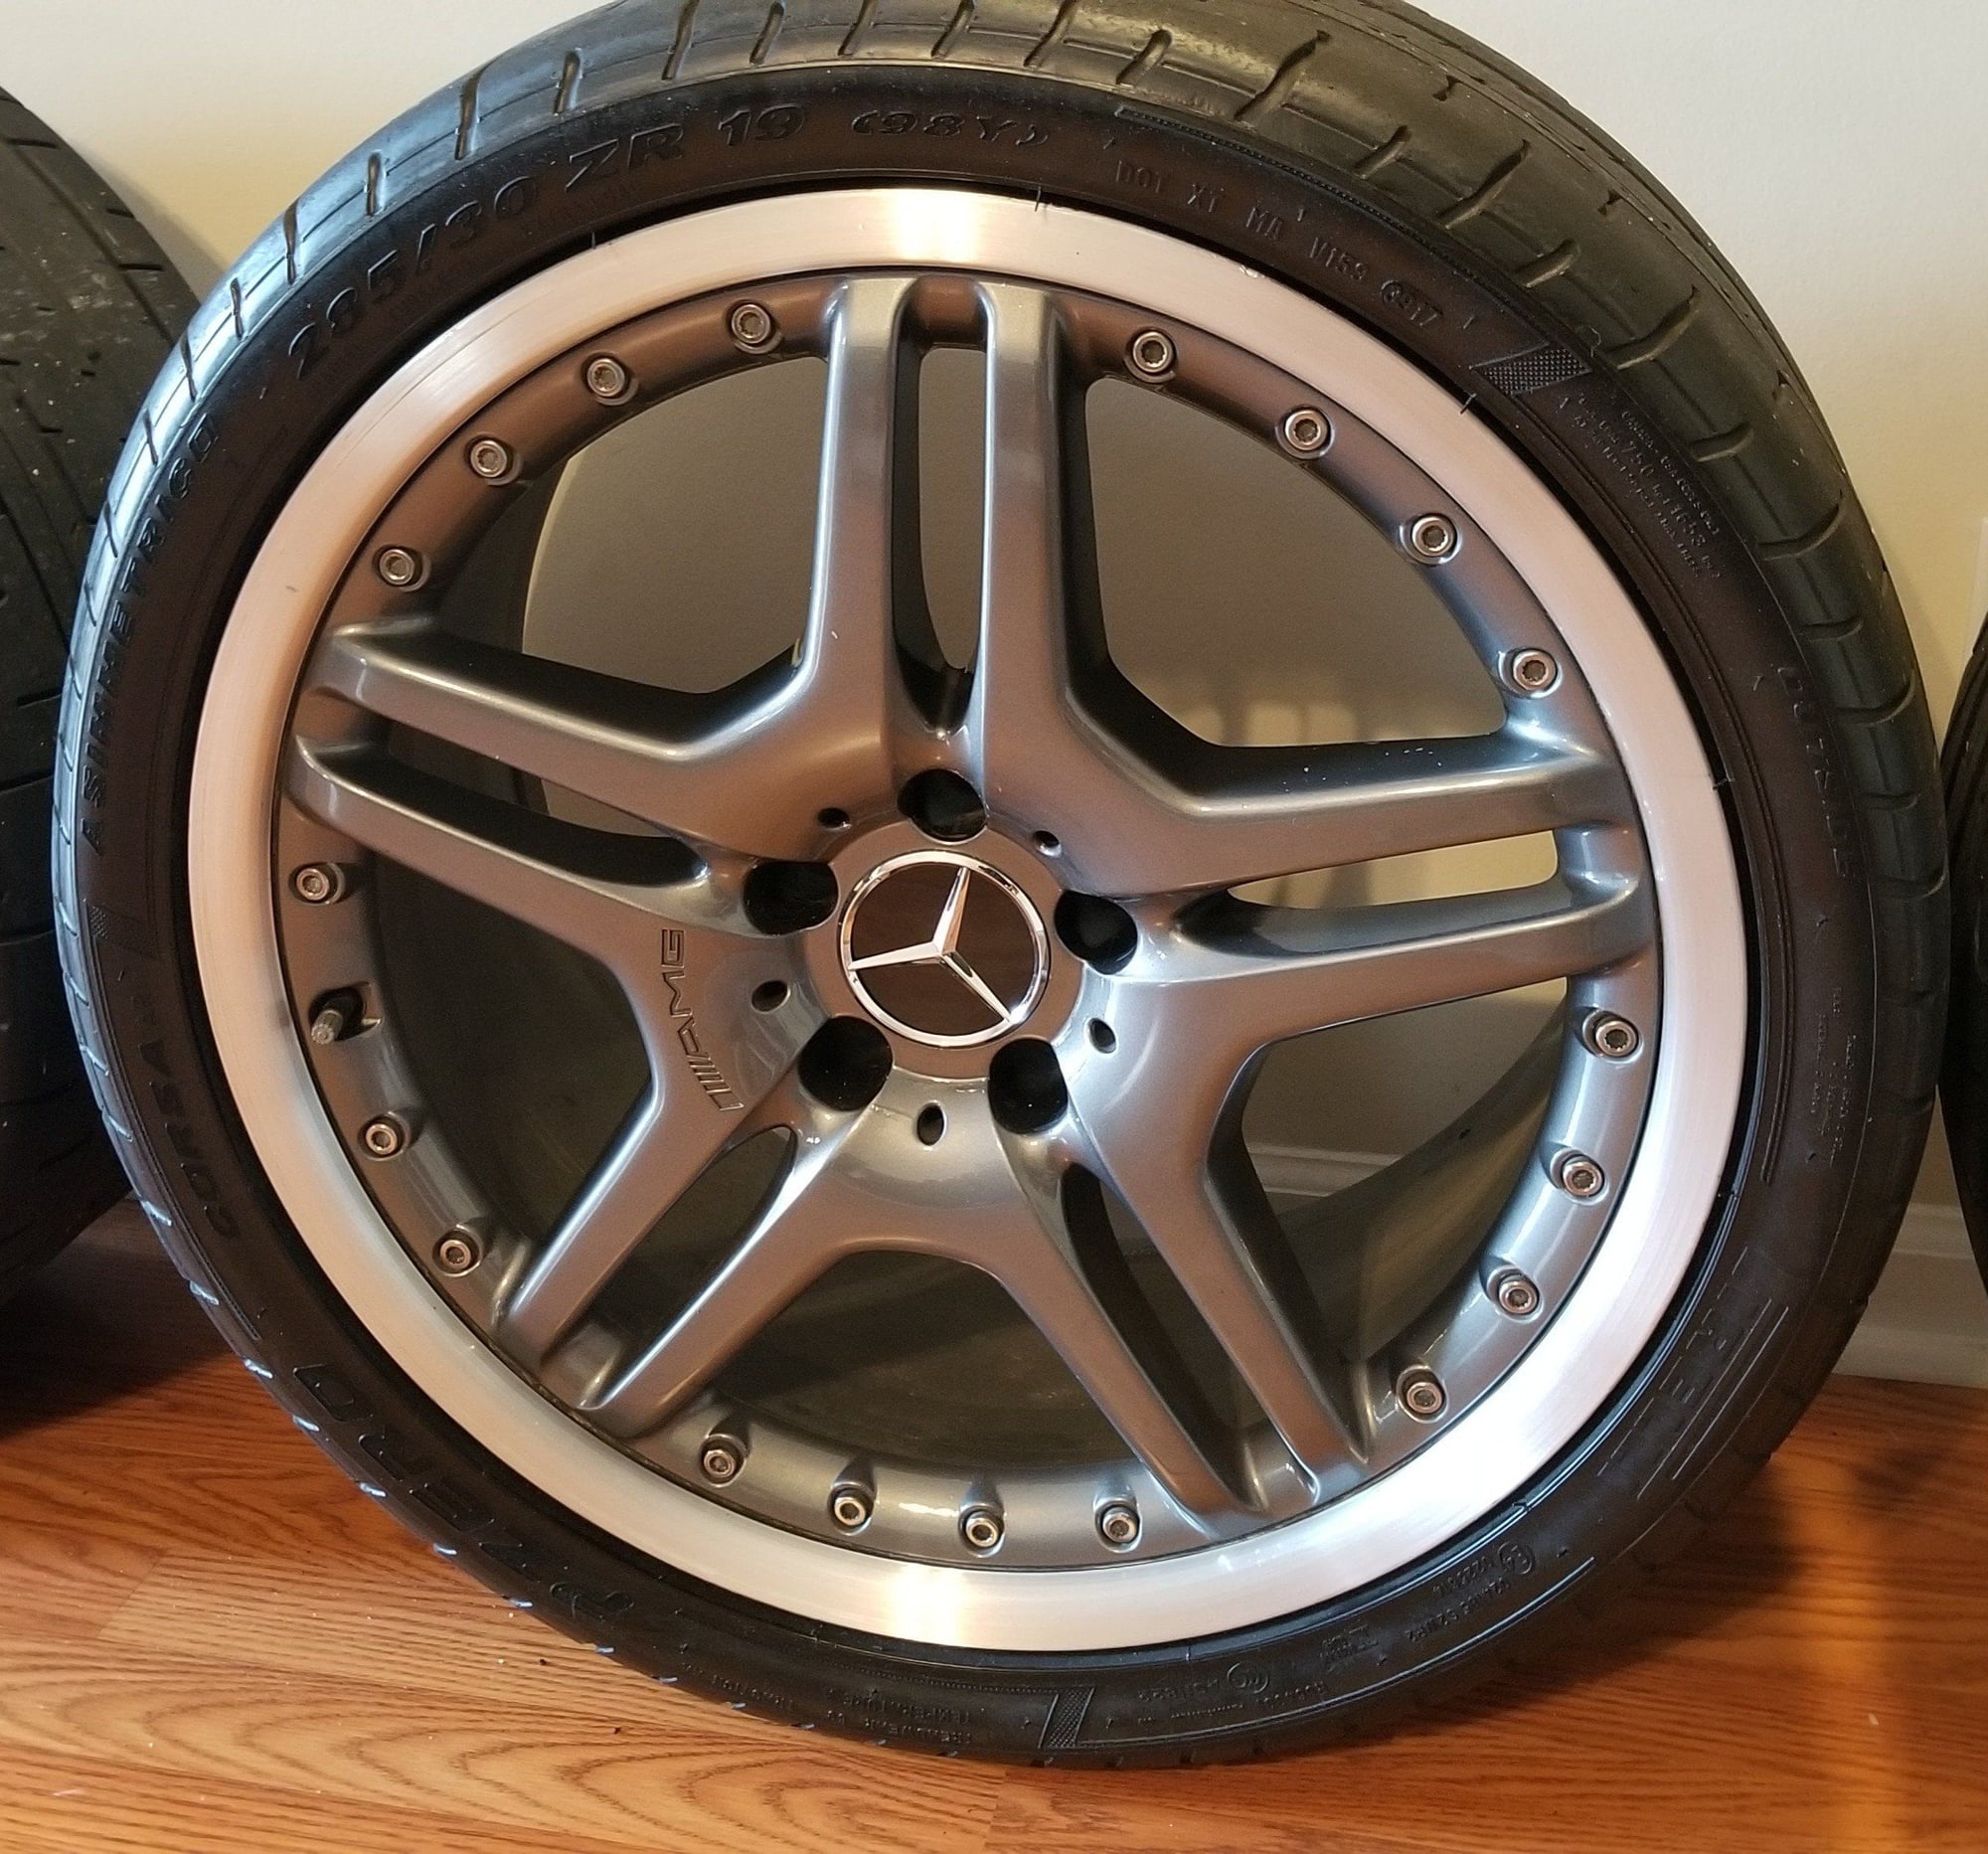 Wheels and Tires/Axles - SL65 wheels - Used - 2003 to 2006 Mercedes-Benz SL65 AMG - 2003 to 2007 Mercedes-Benz E55 AMG - Fayetteville, NC 28304, United States